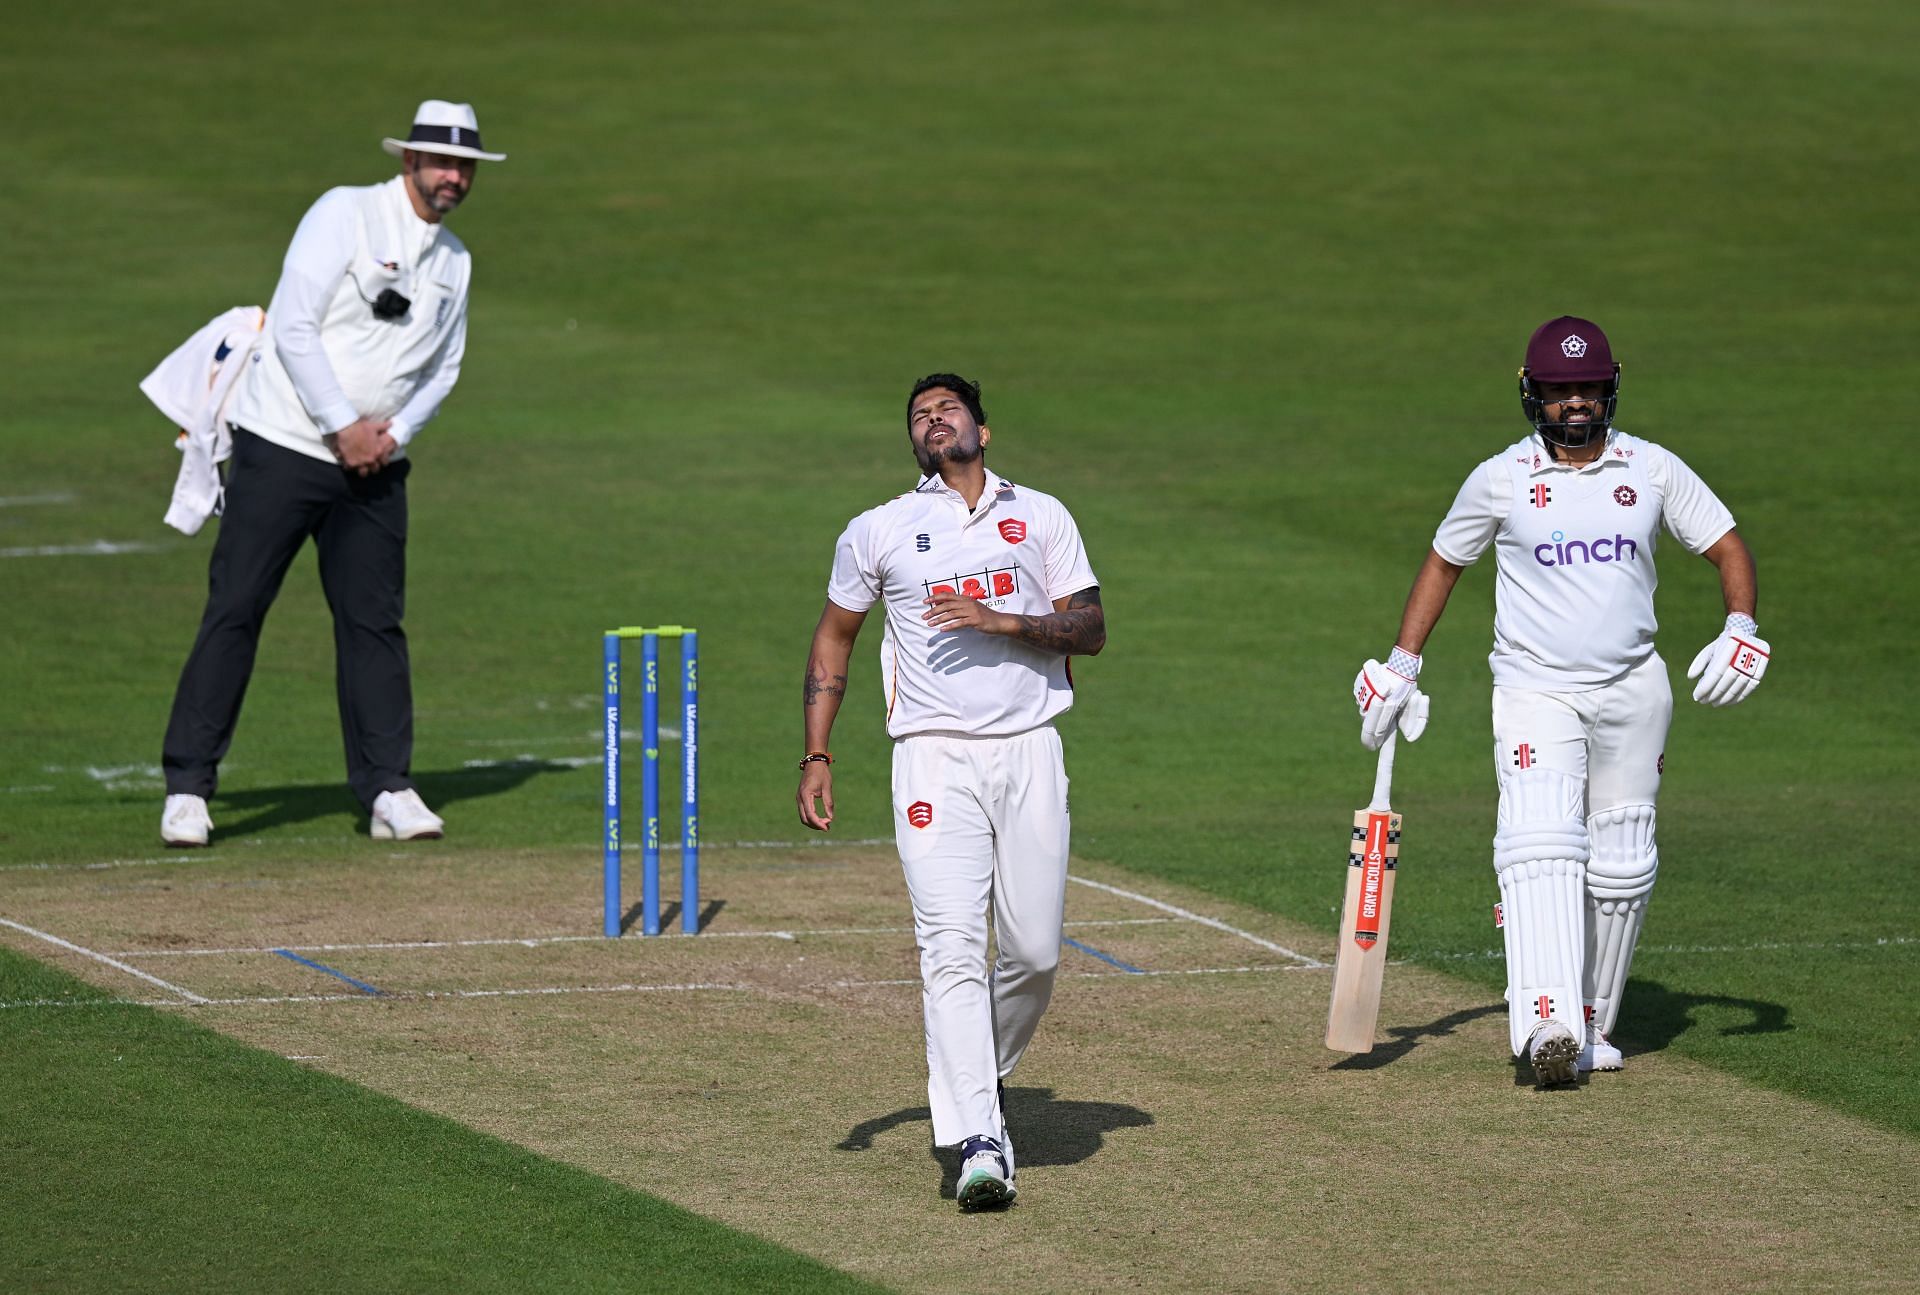 Karun Nair with the bat in hand, is in action for Northamptonshire.